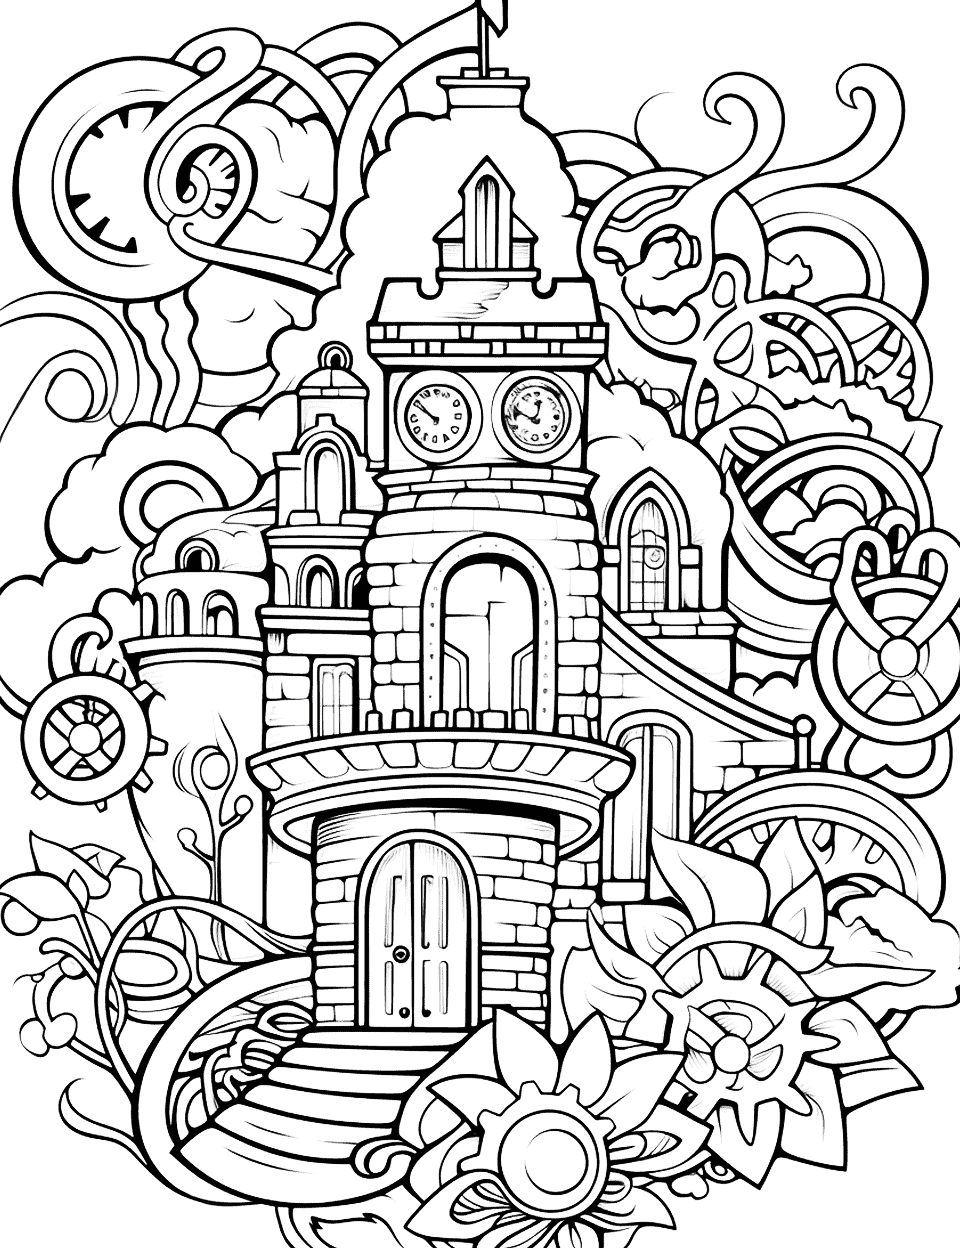 Steampunk Fairy Tale Adult Coloring Page - A fairy tale scene with a steampunk twist featuring mechanical creatures, gears, and cog-filled landscapes.